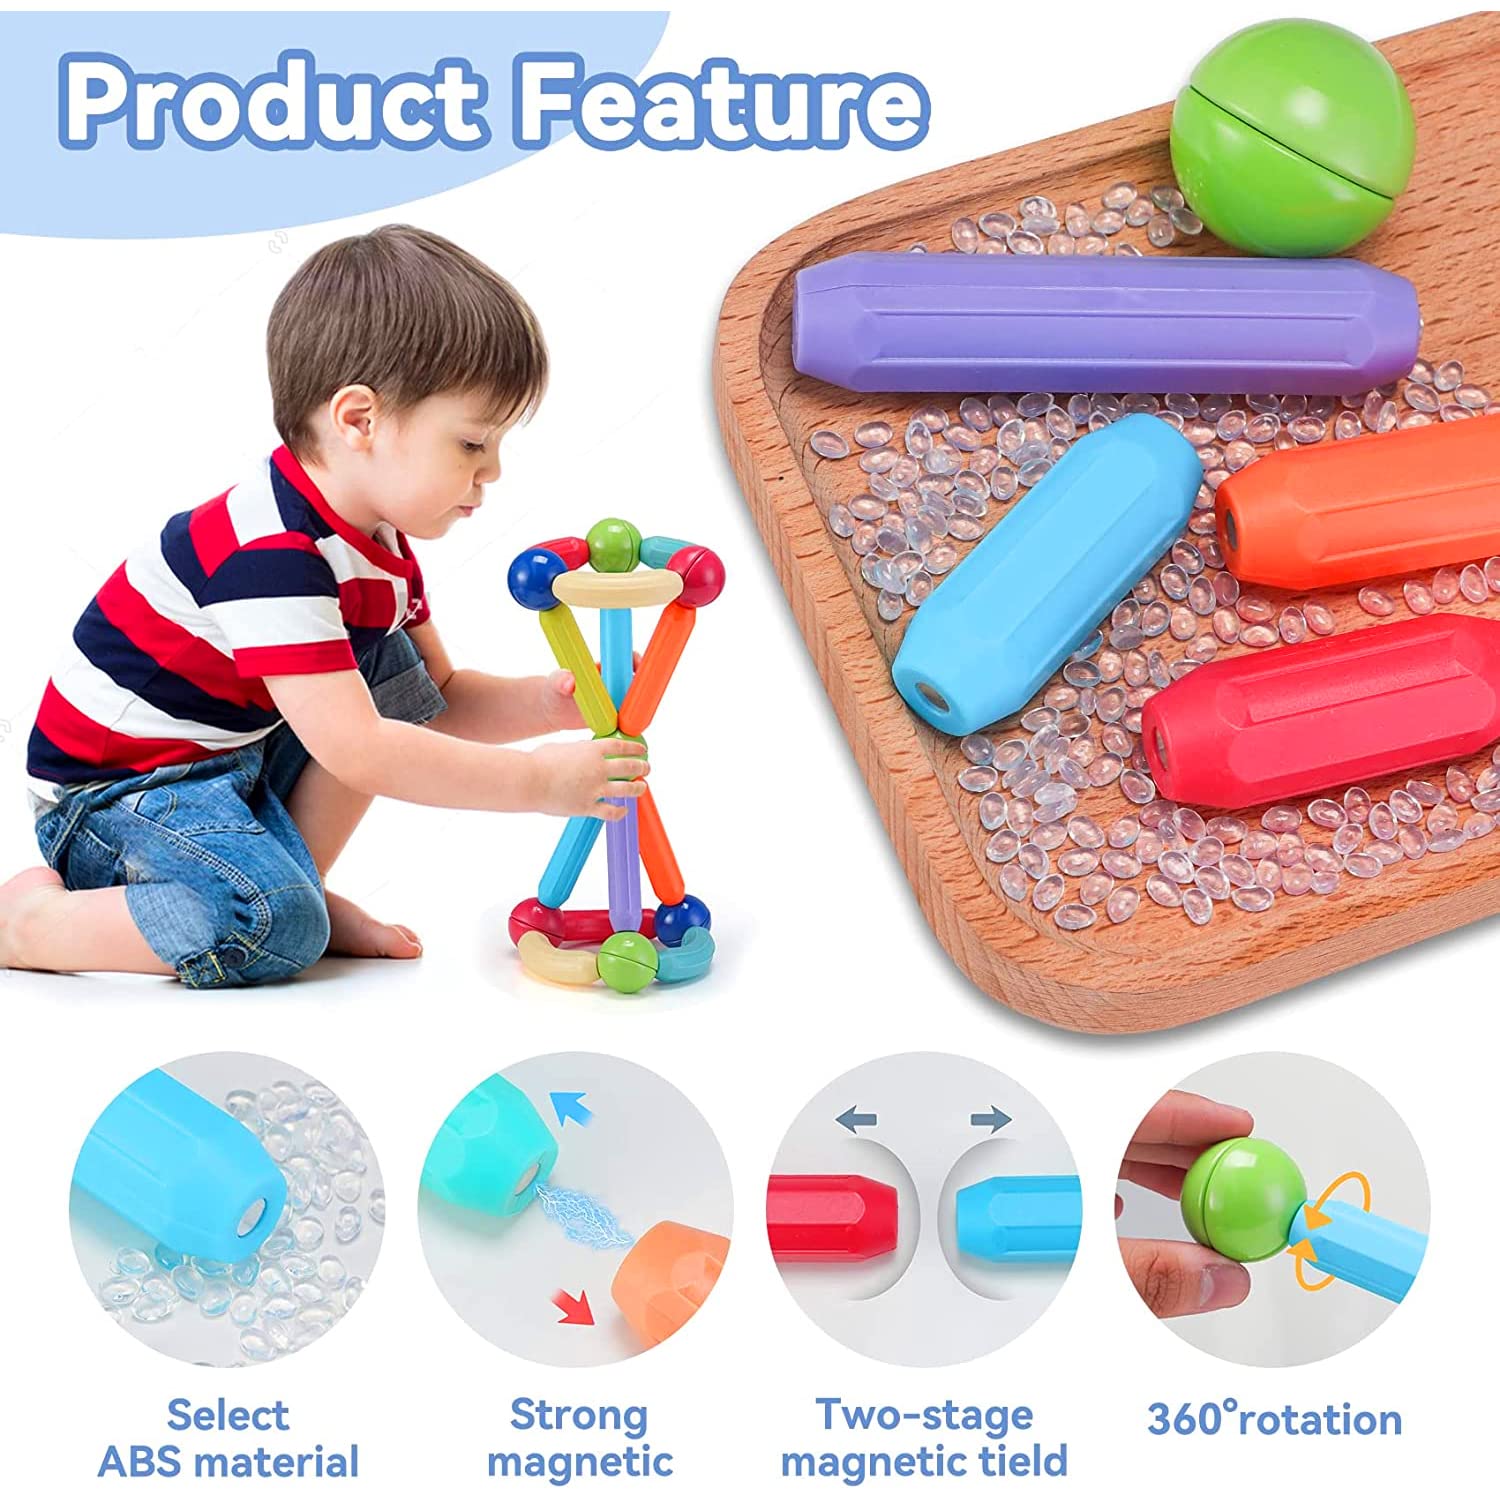 ToyDen Magnetic Sticks Building Blocks Set for Kids Age 3+ - Creative and Educational Construction Toy for Boys and Girls, Includes Magnetic Balls, Safe and Durable, STEM Learning - 64 Pcs